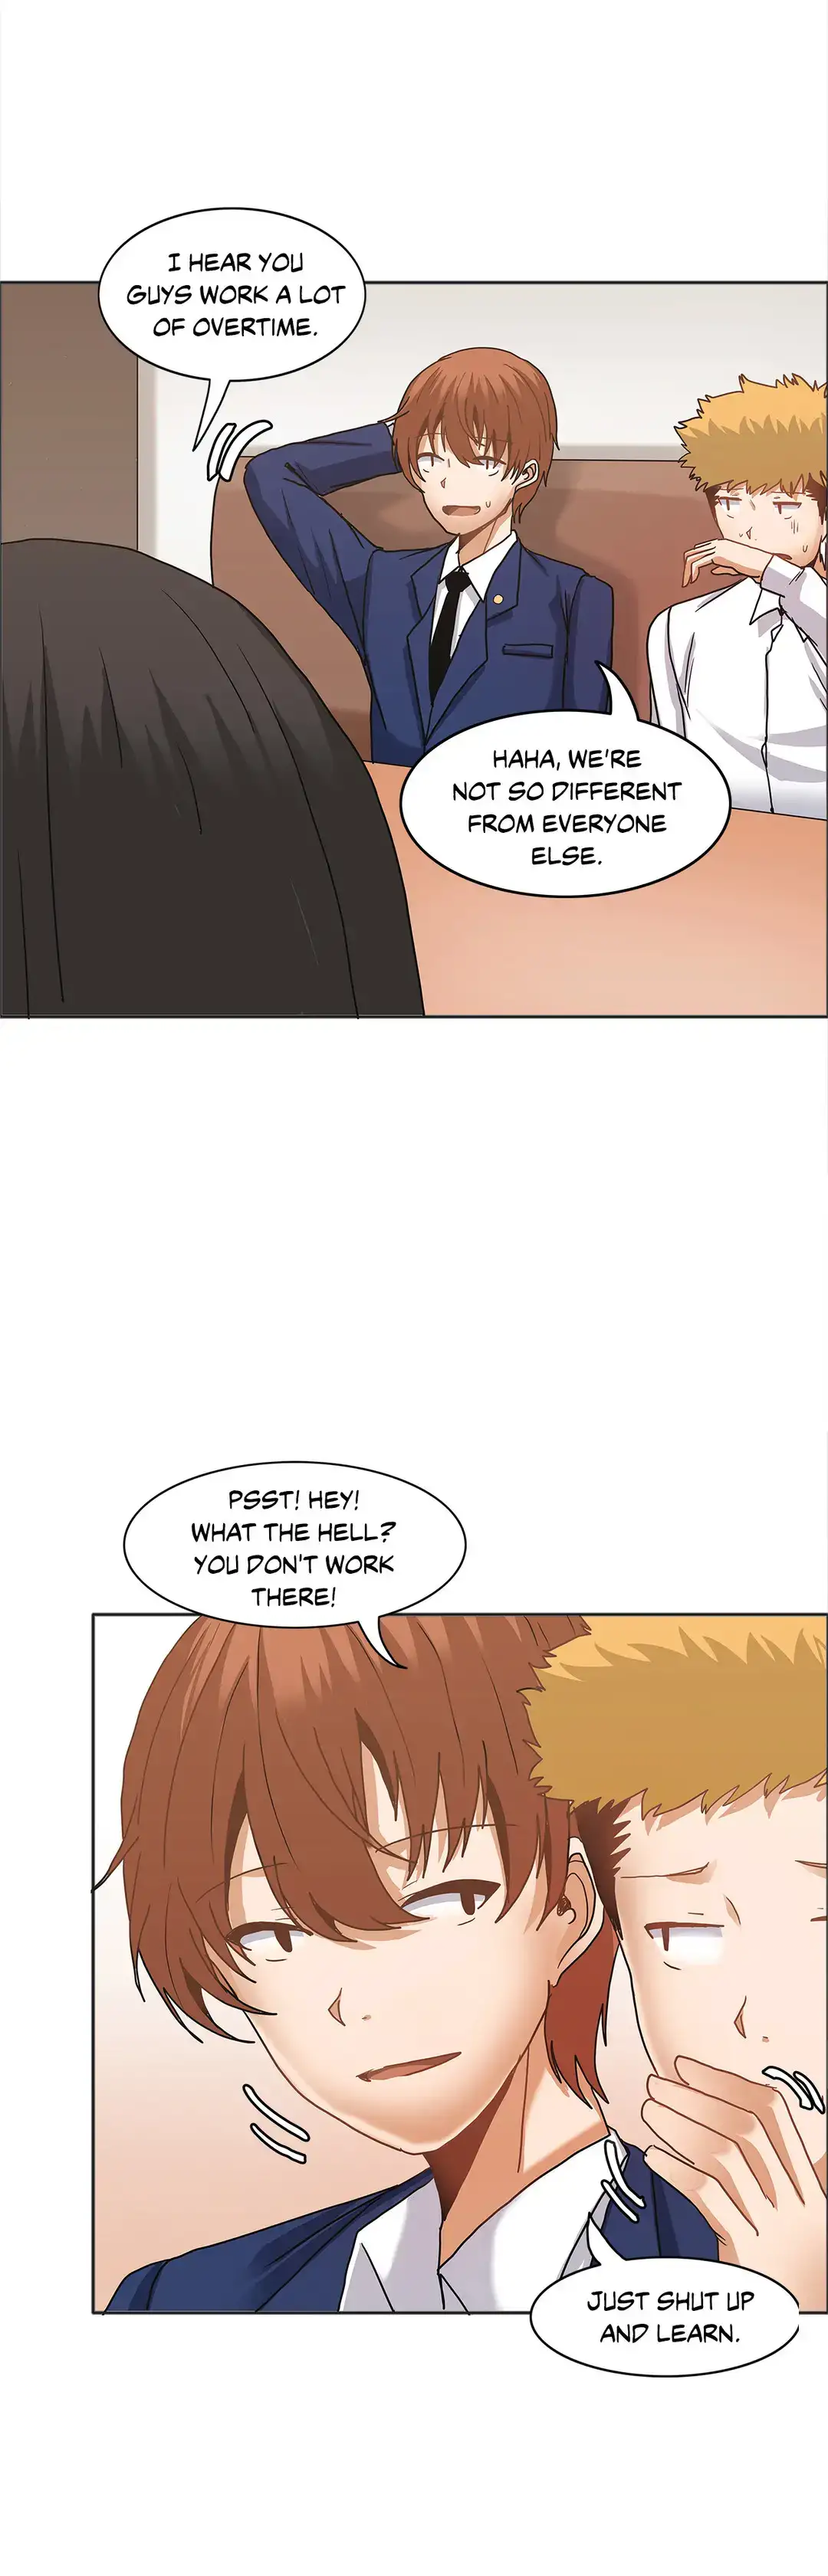 The Girl That Wet the Wall - Chapter 15 Page 10